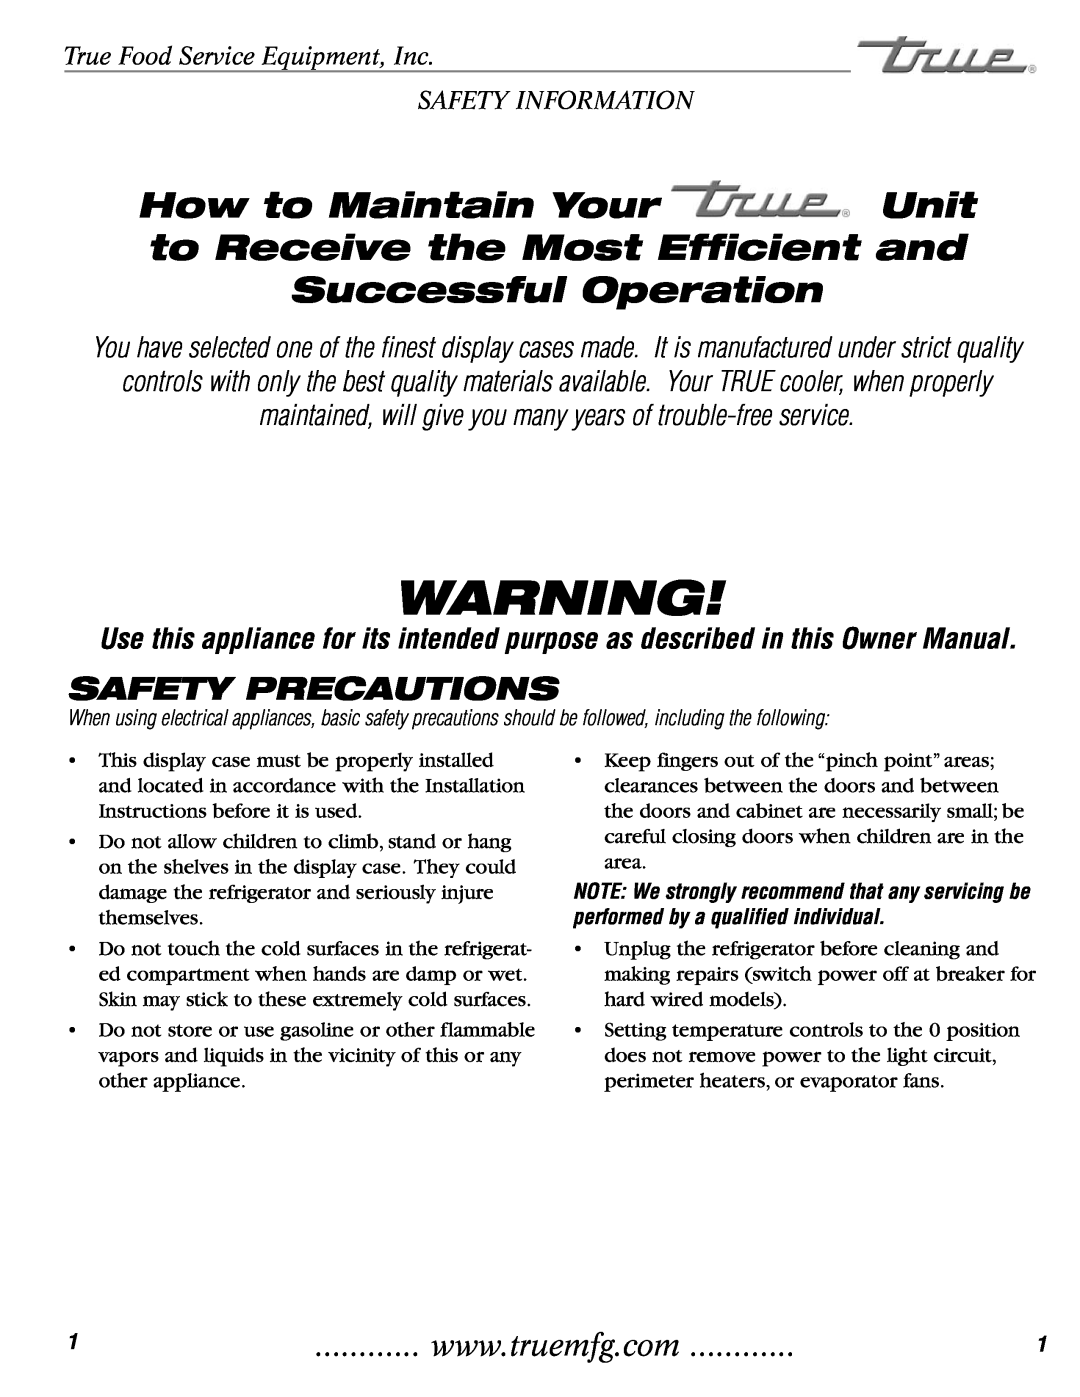 True Manufacturing Company TCGR-77 Safety Precautions, True Food Service Equipment, Inc, Safety Information 